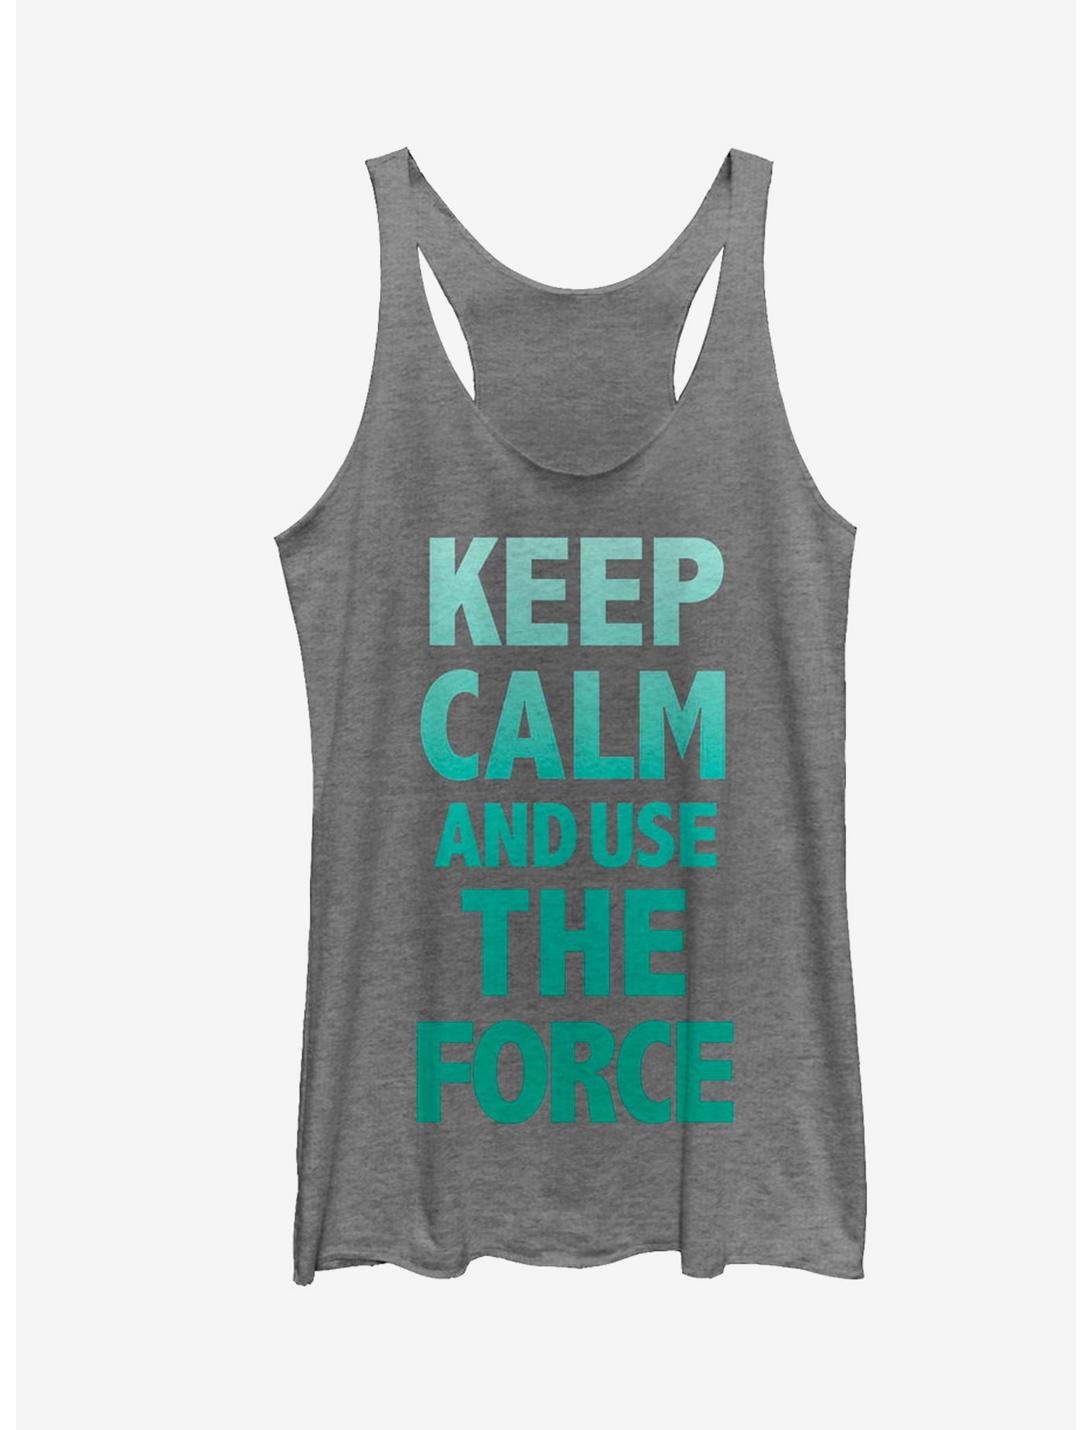 Star Wars Keep Calm and Use the Force Girls Tanks - GREY | Hot Topic